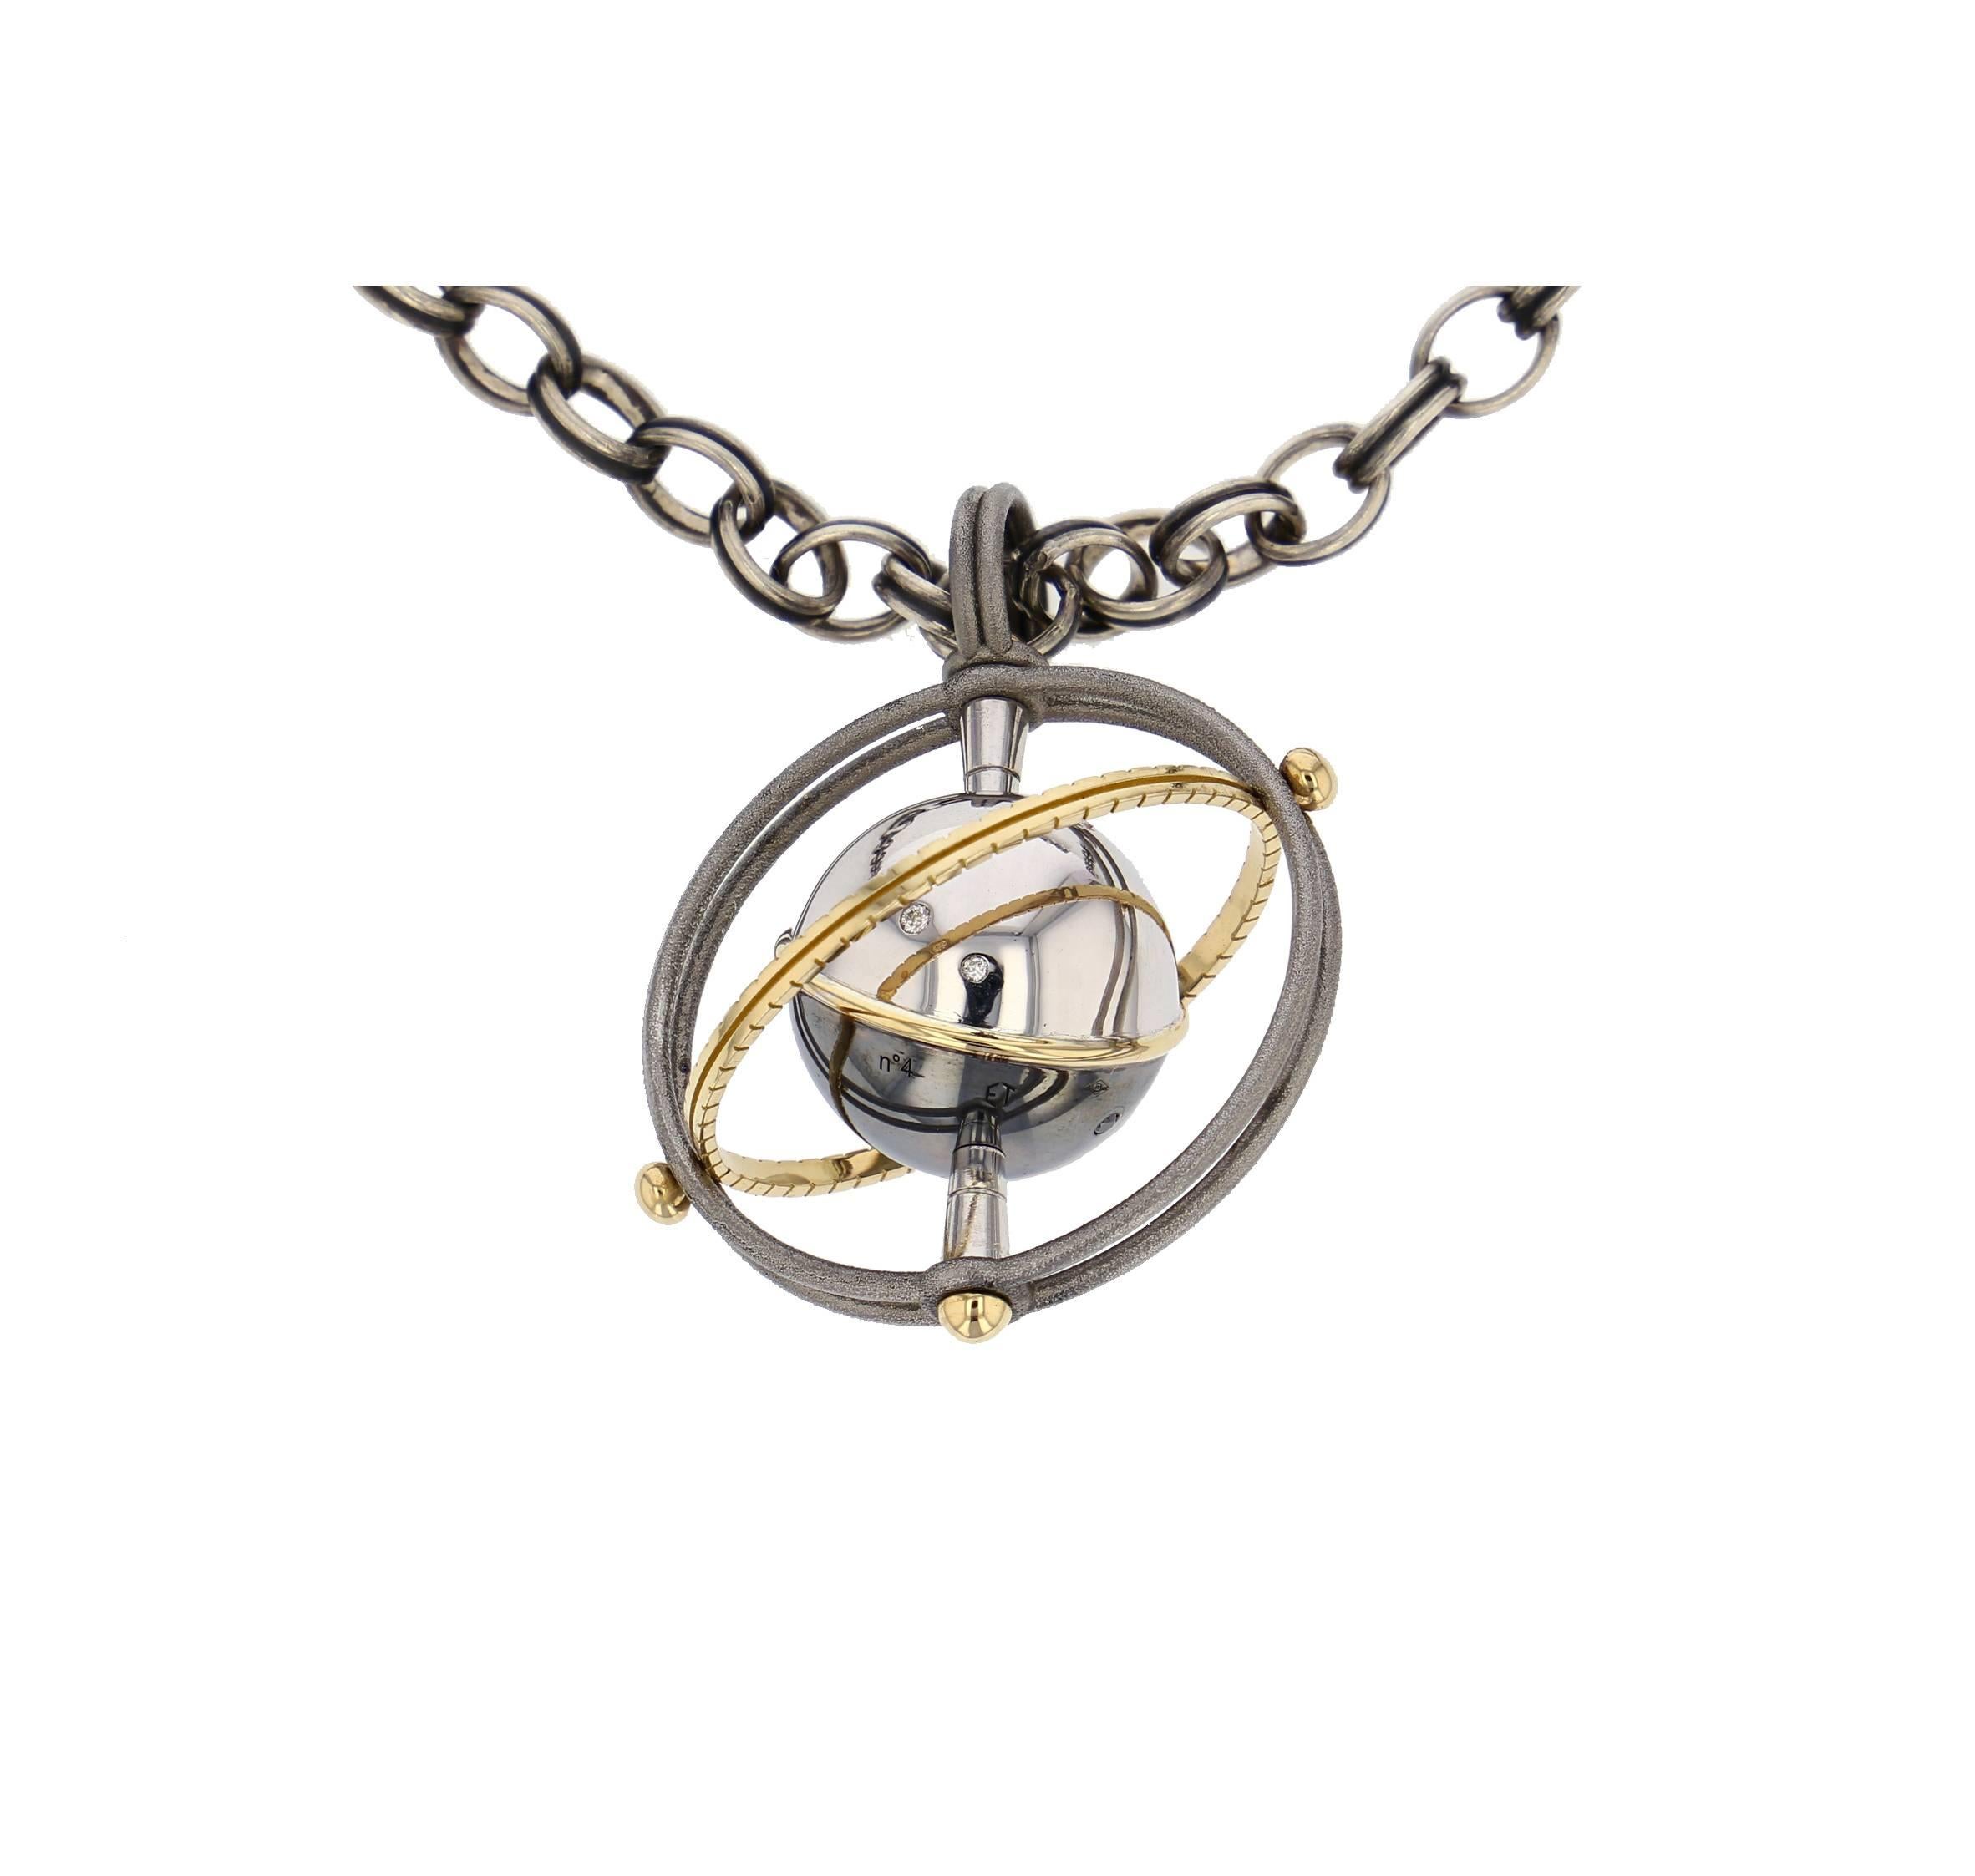 Mir Pendant Gold Silver Diamonds

Pendant on a silver chain. Two polished steel bands holding a rotative system with a white gold axis carrying a white gold and patinated silver globe, circled in yellow gold. This moving planet is set with white and